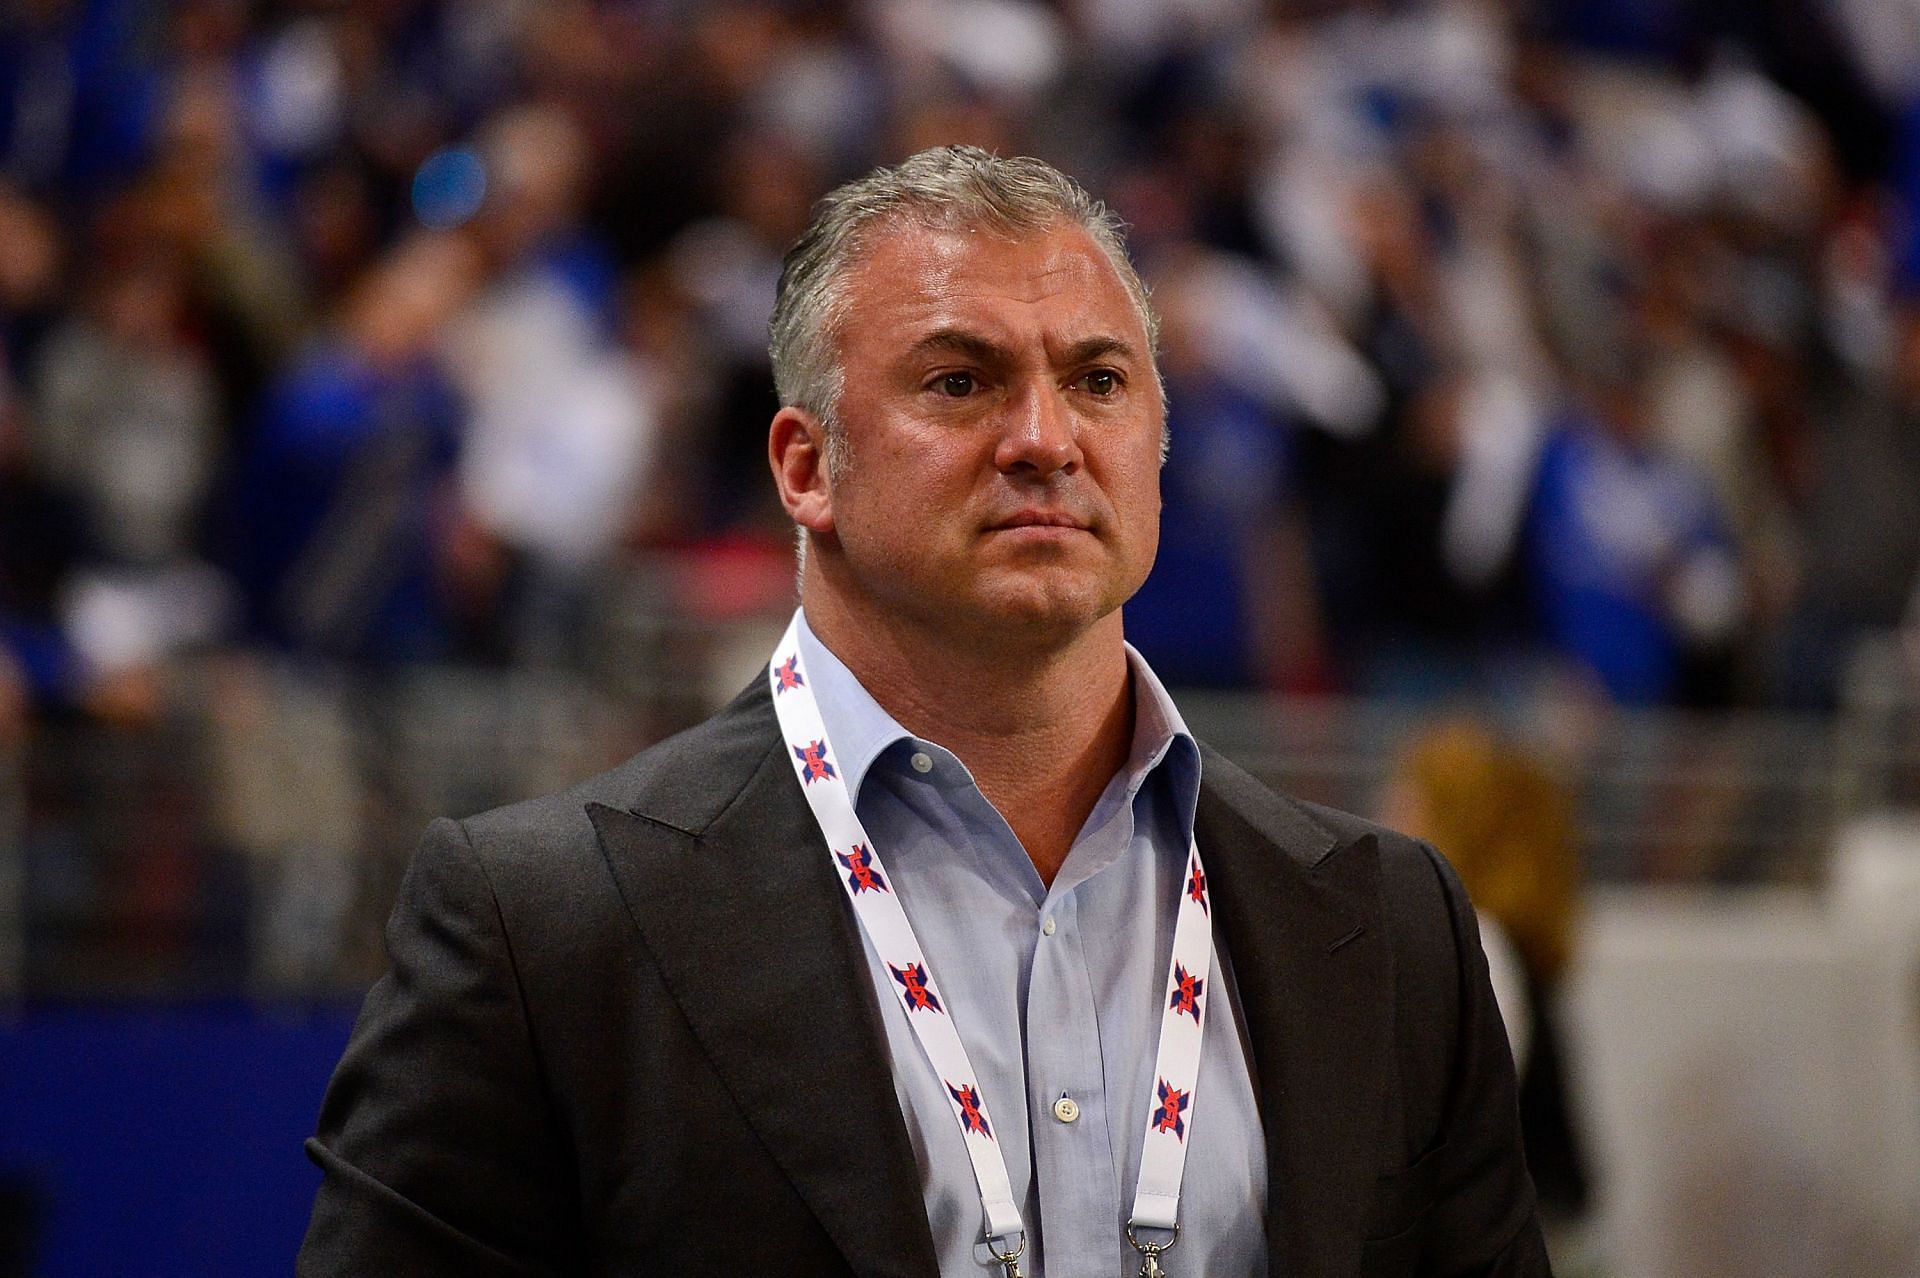 Shane McMahon was quietly let go by WWE after Royal rumble 2022